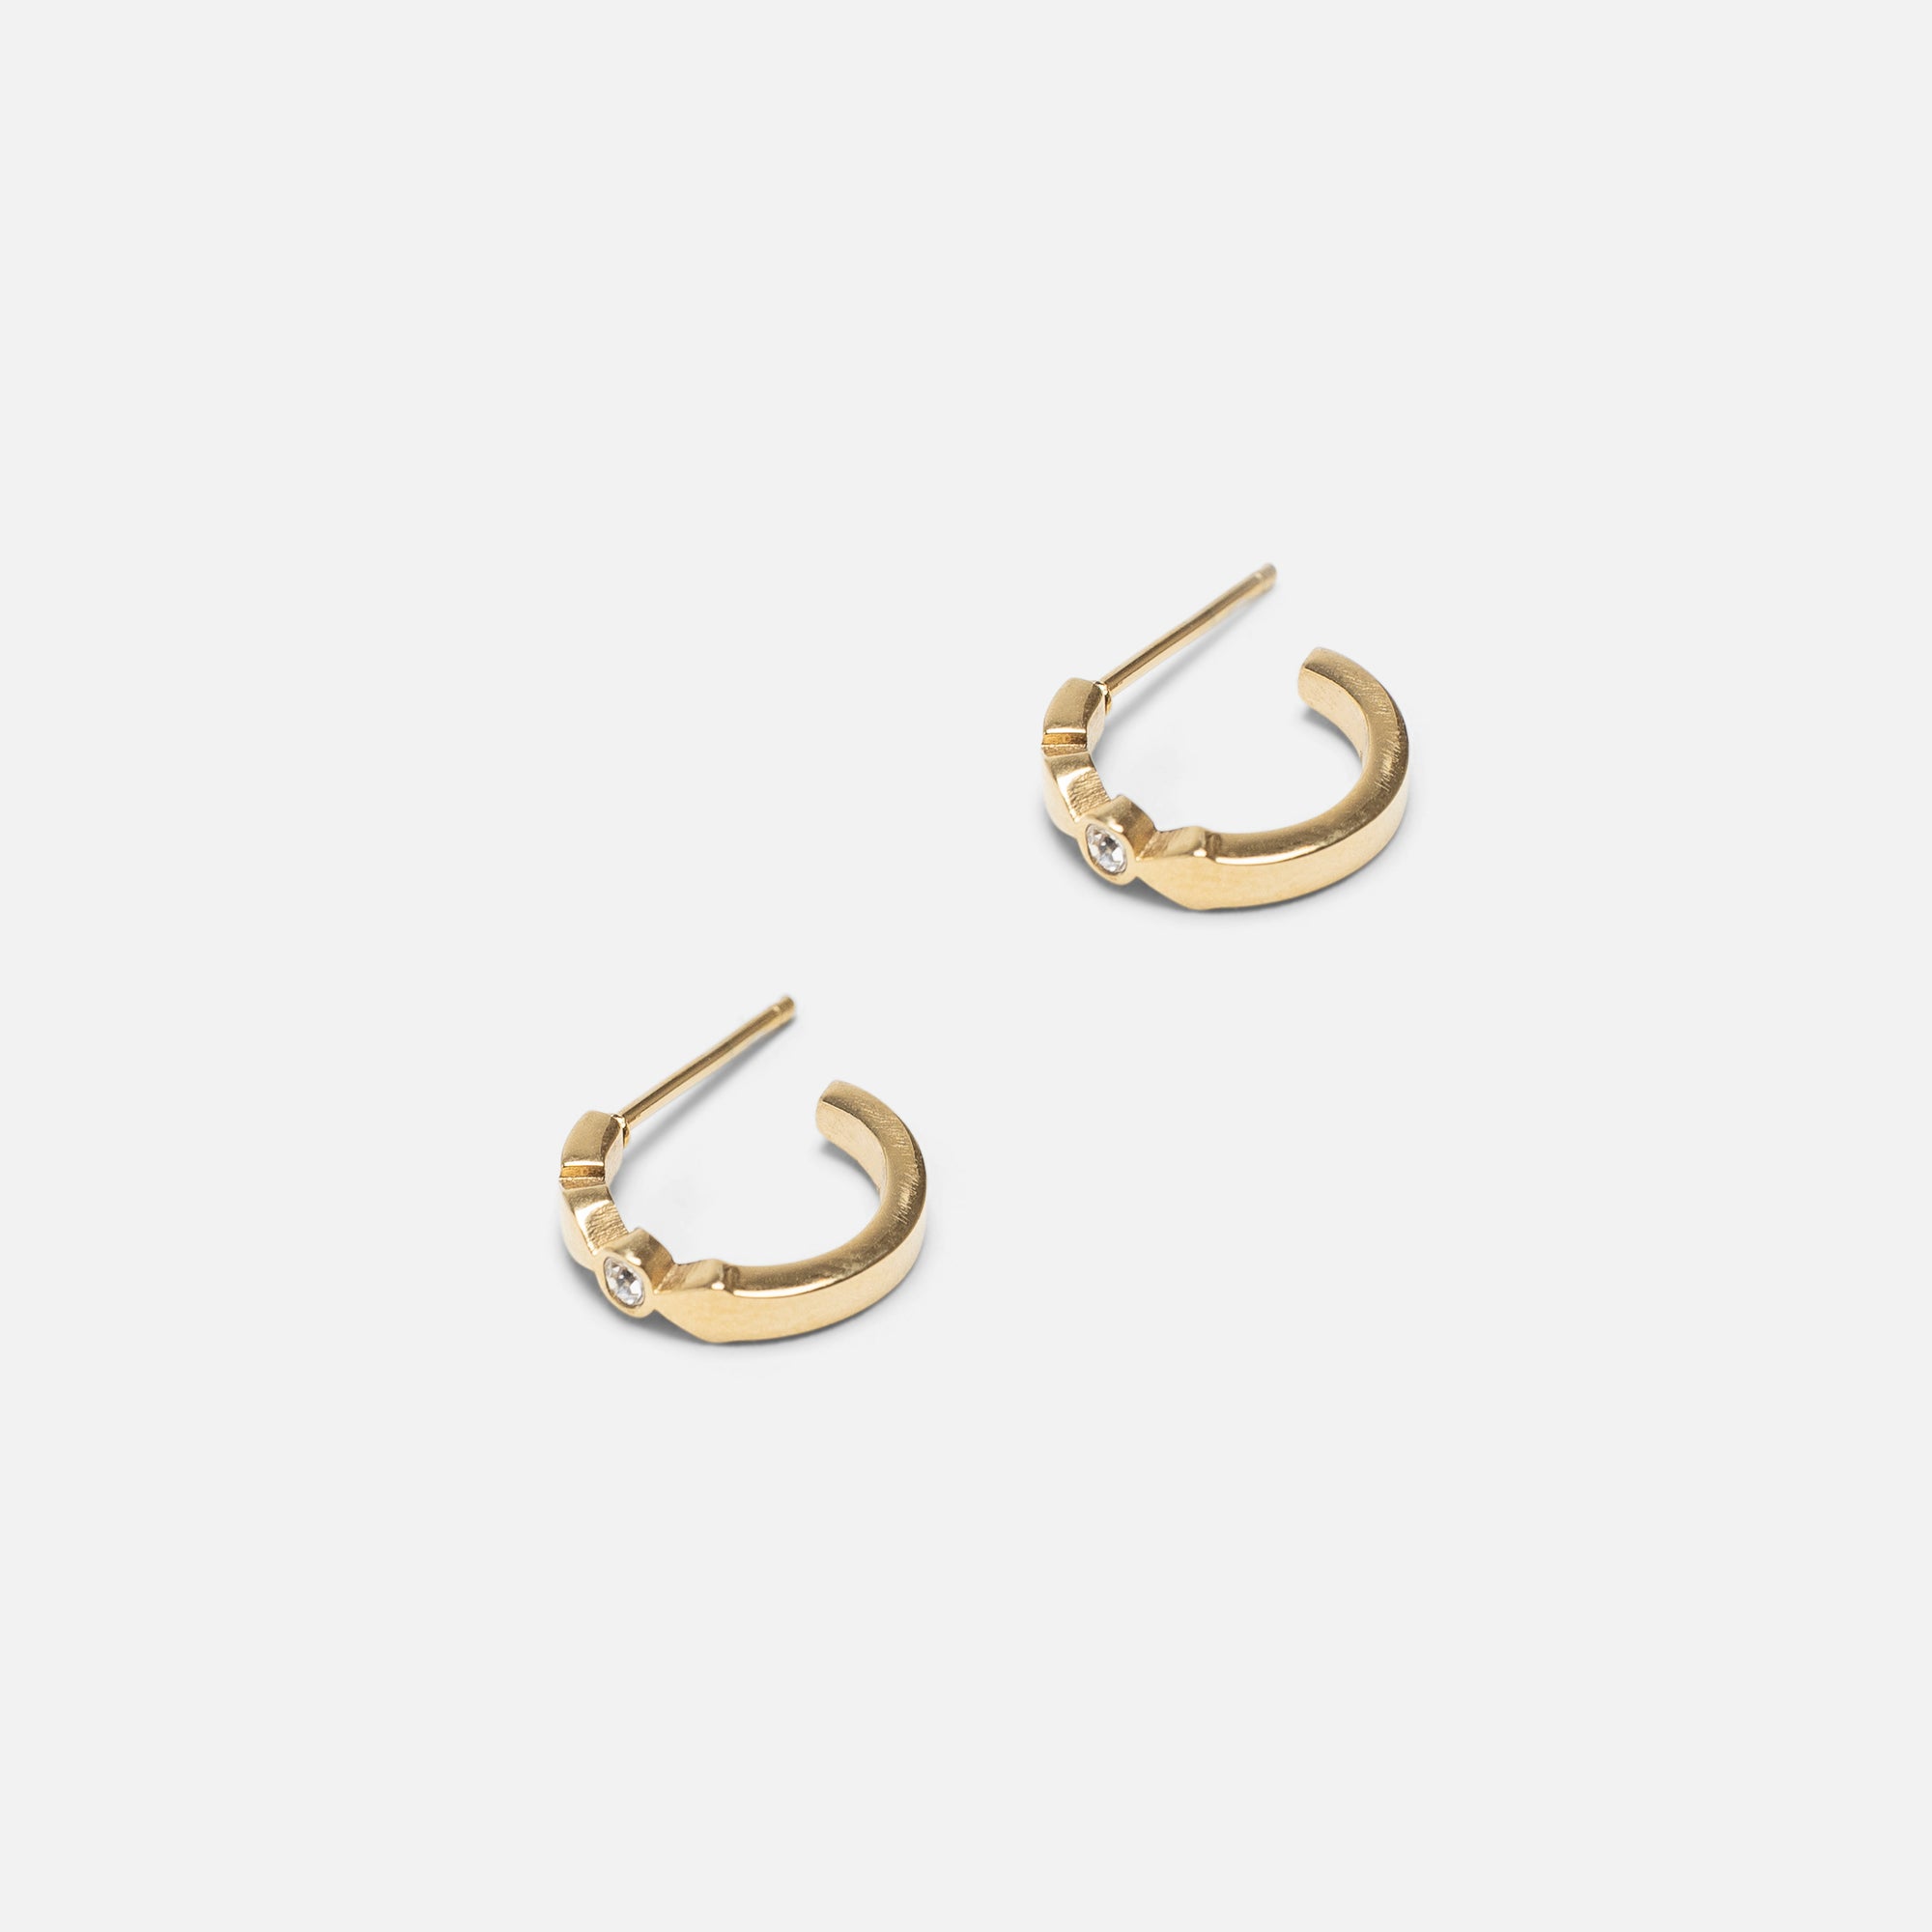 Textured golden hoop earrings with stone in stainless steel 